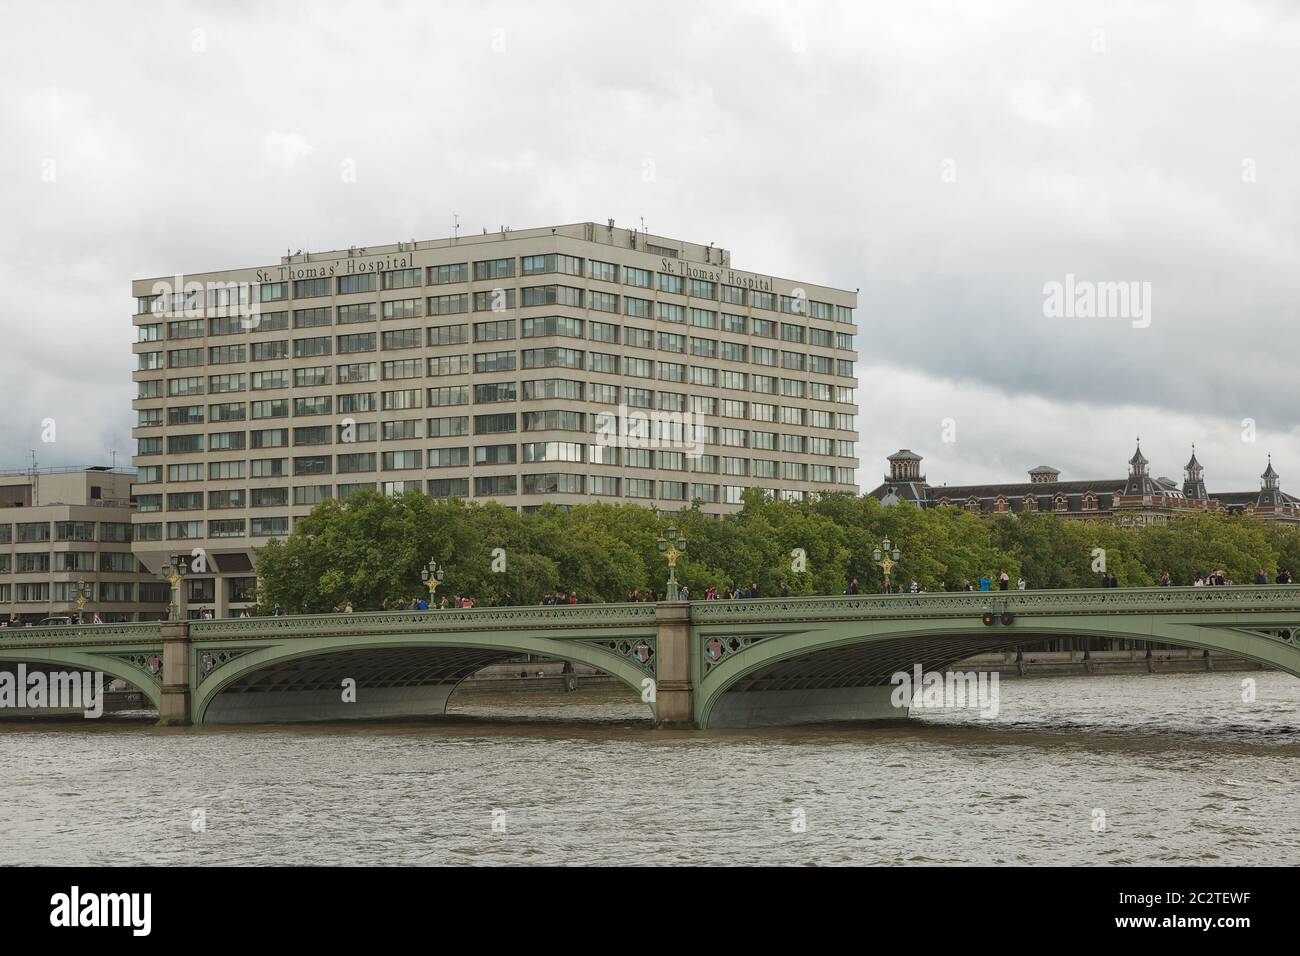 St Thomas Hospital located on the banks of the river Thames, Westminster in London Stock Photo